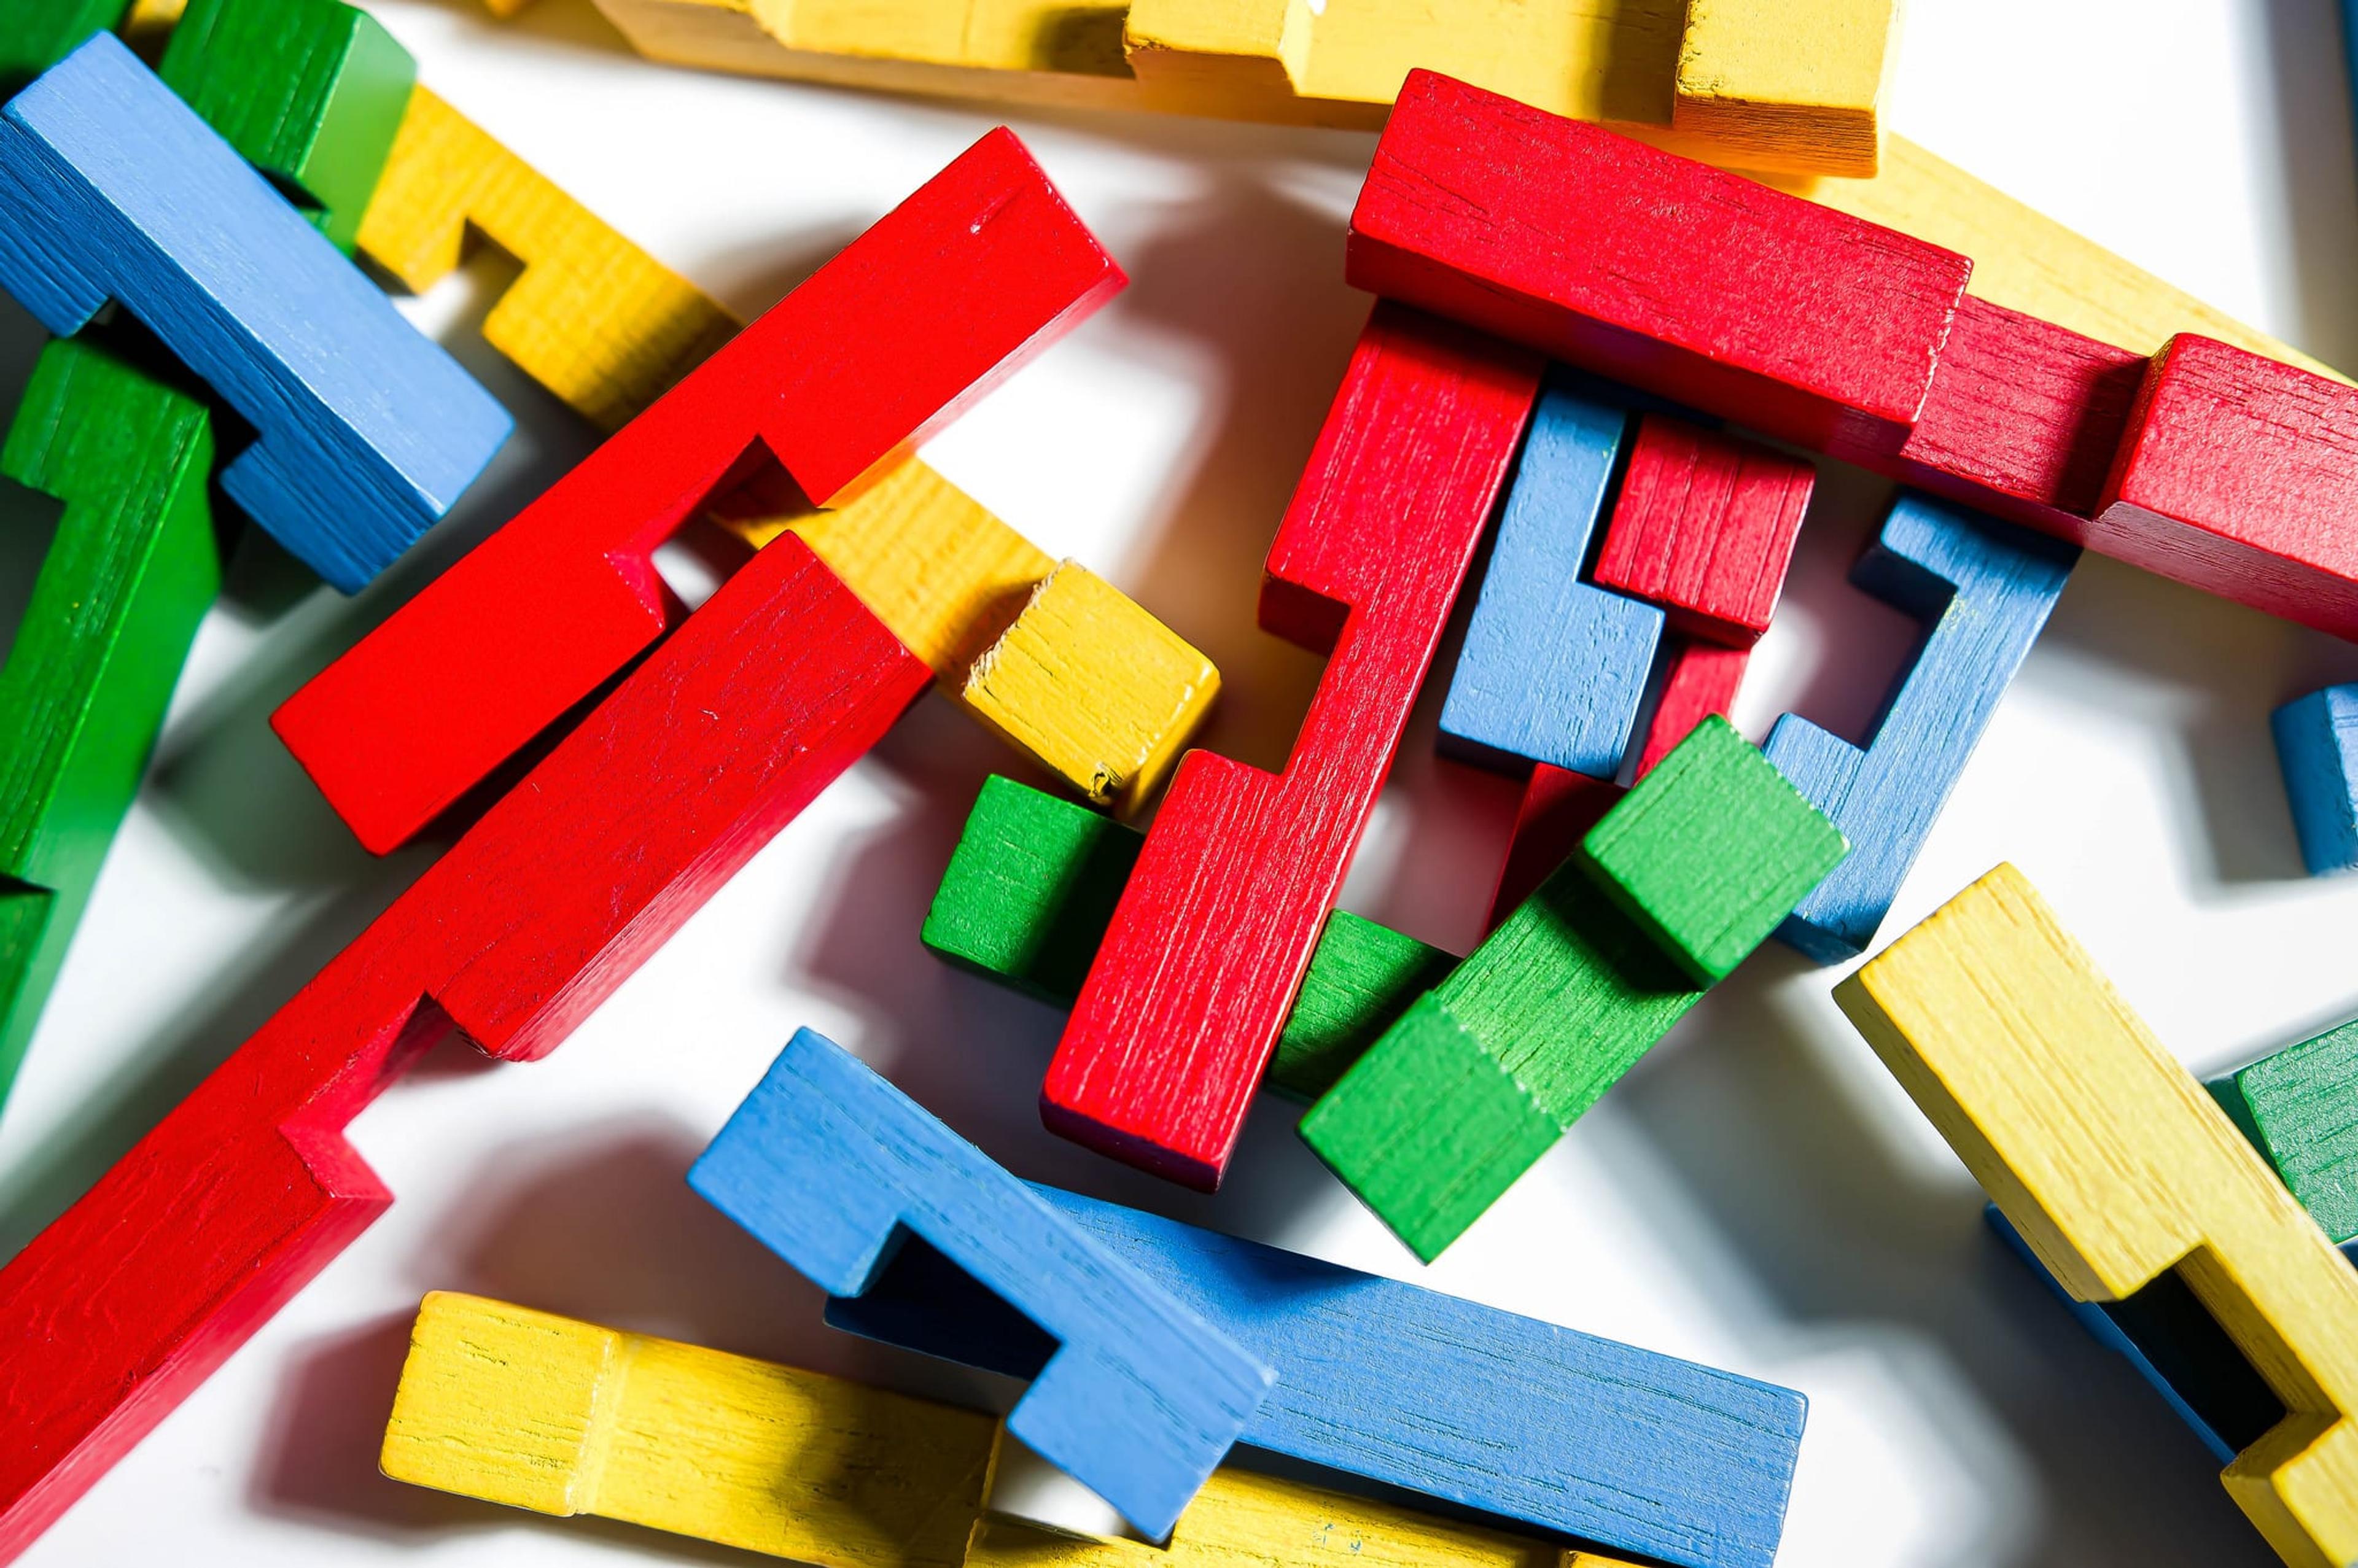 Image of brightly colored blocks against a white background.